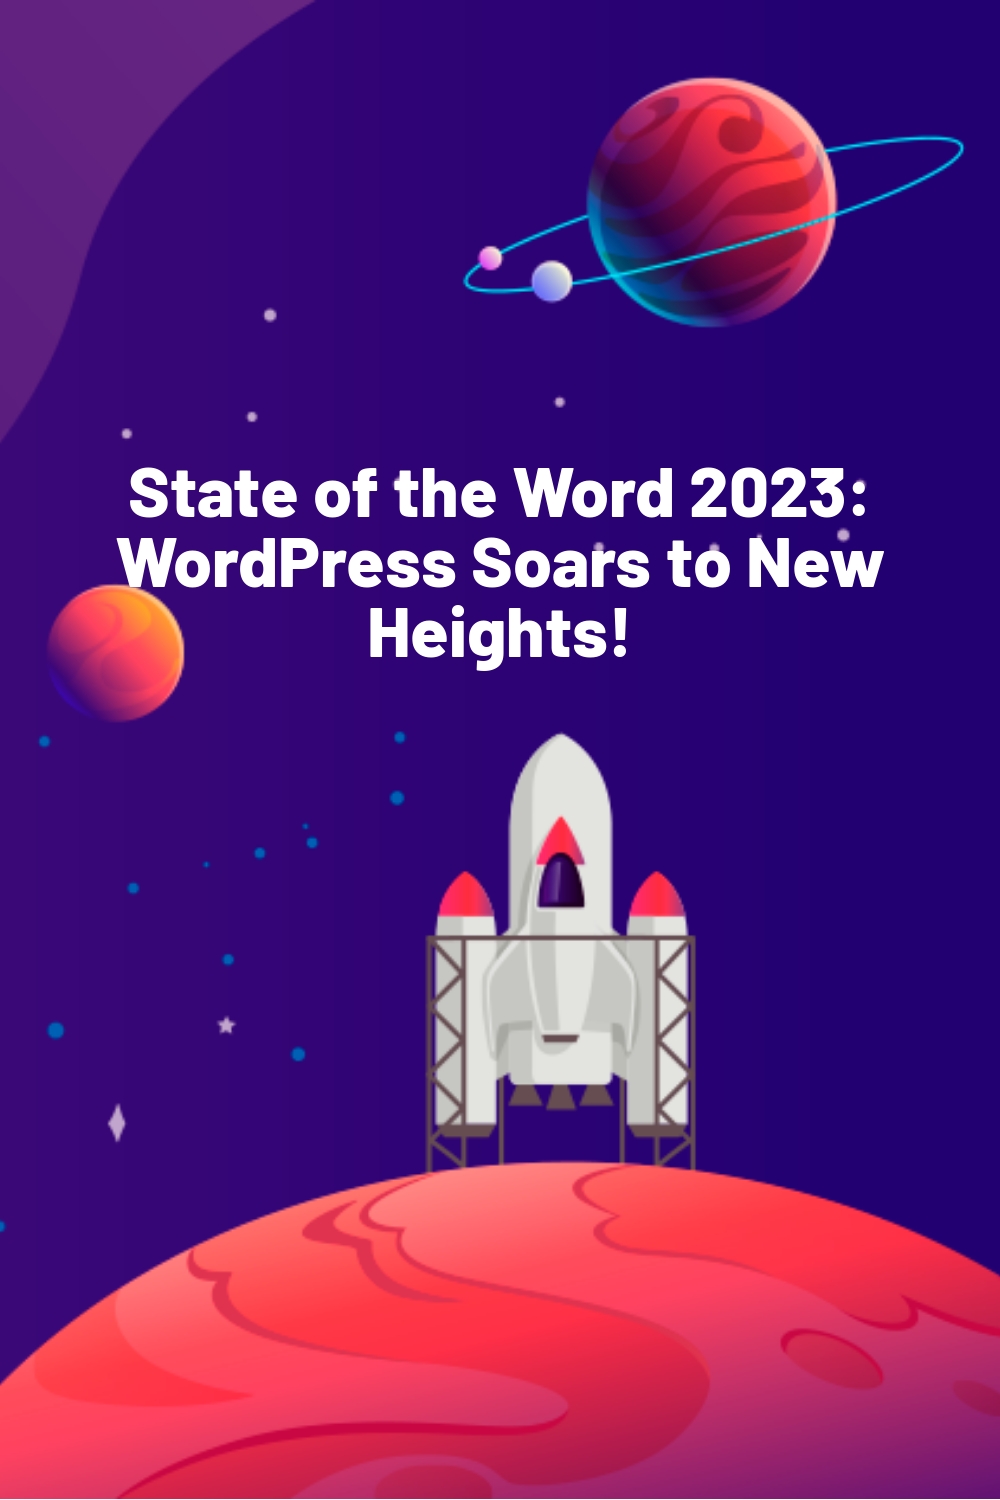 State of the Word 2023: WordPress Soars to New Heights!